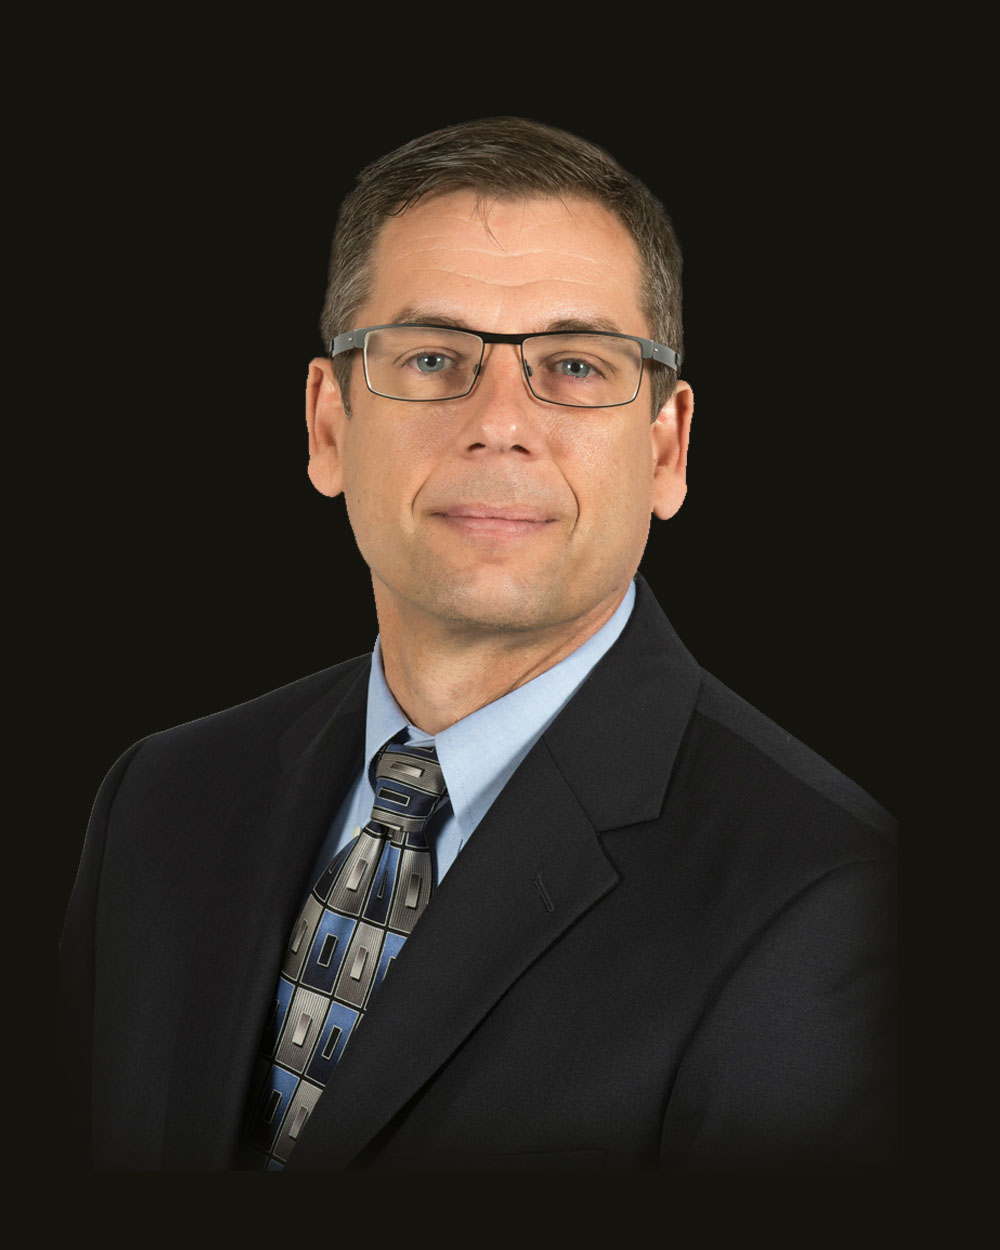 Dr. Michael Lucchesi